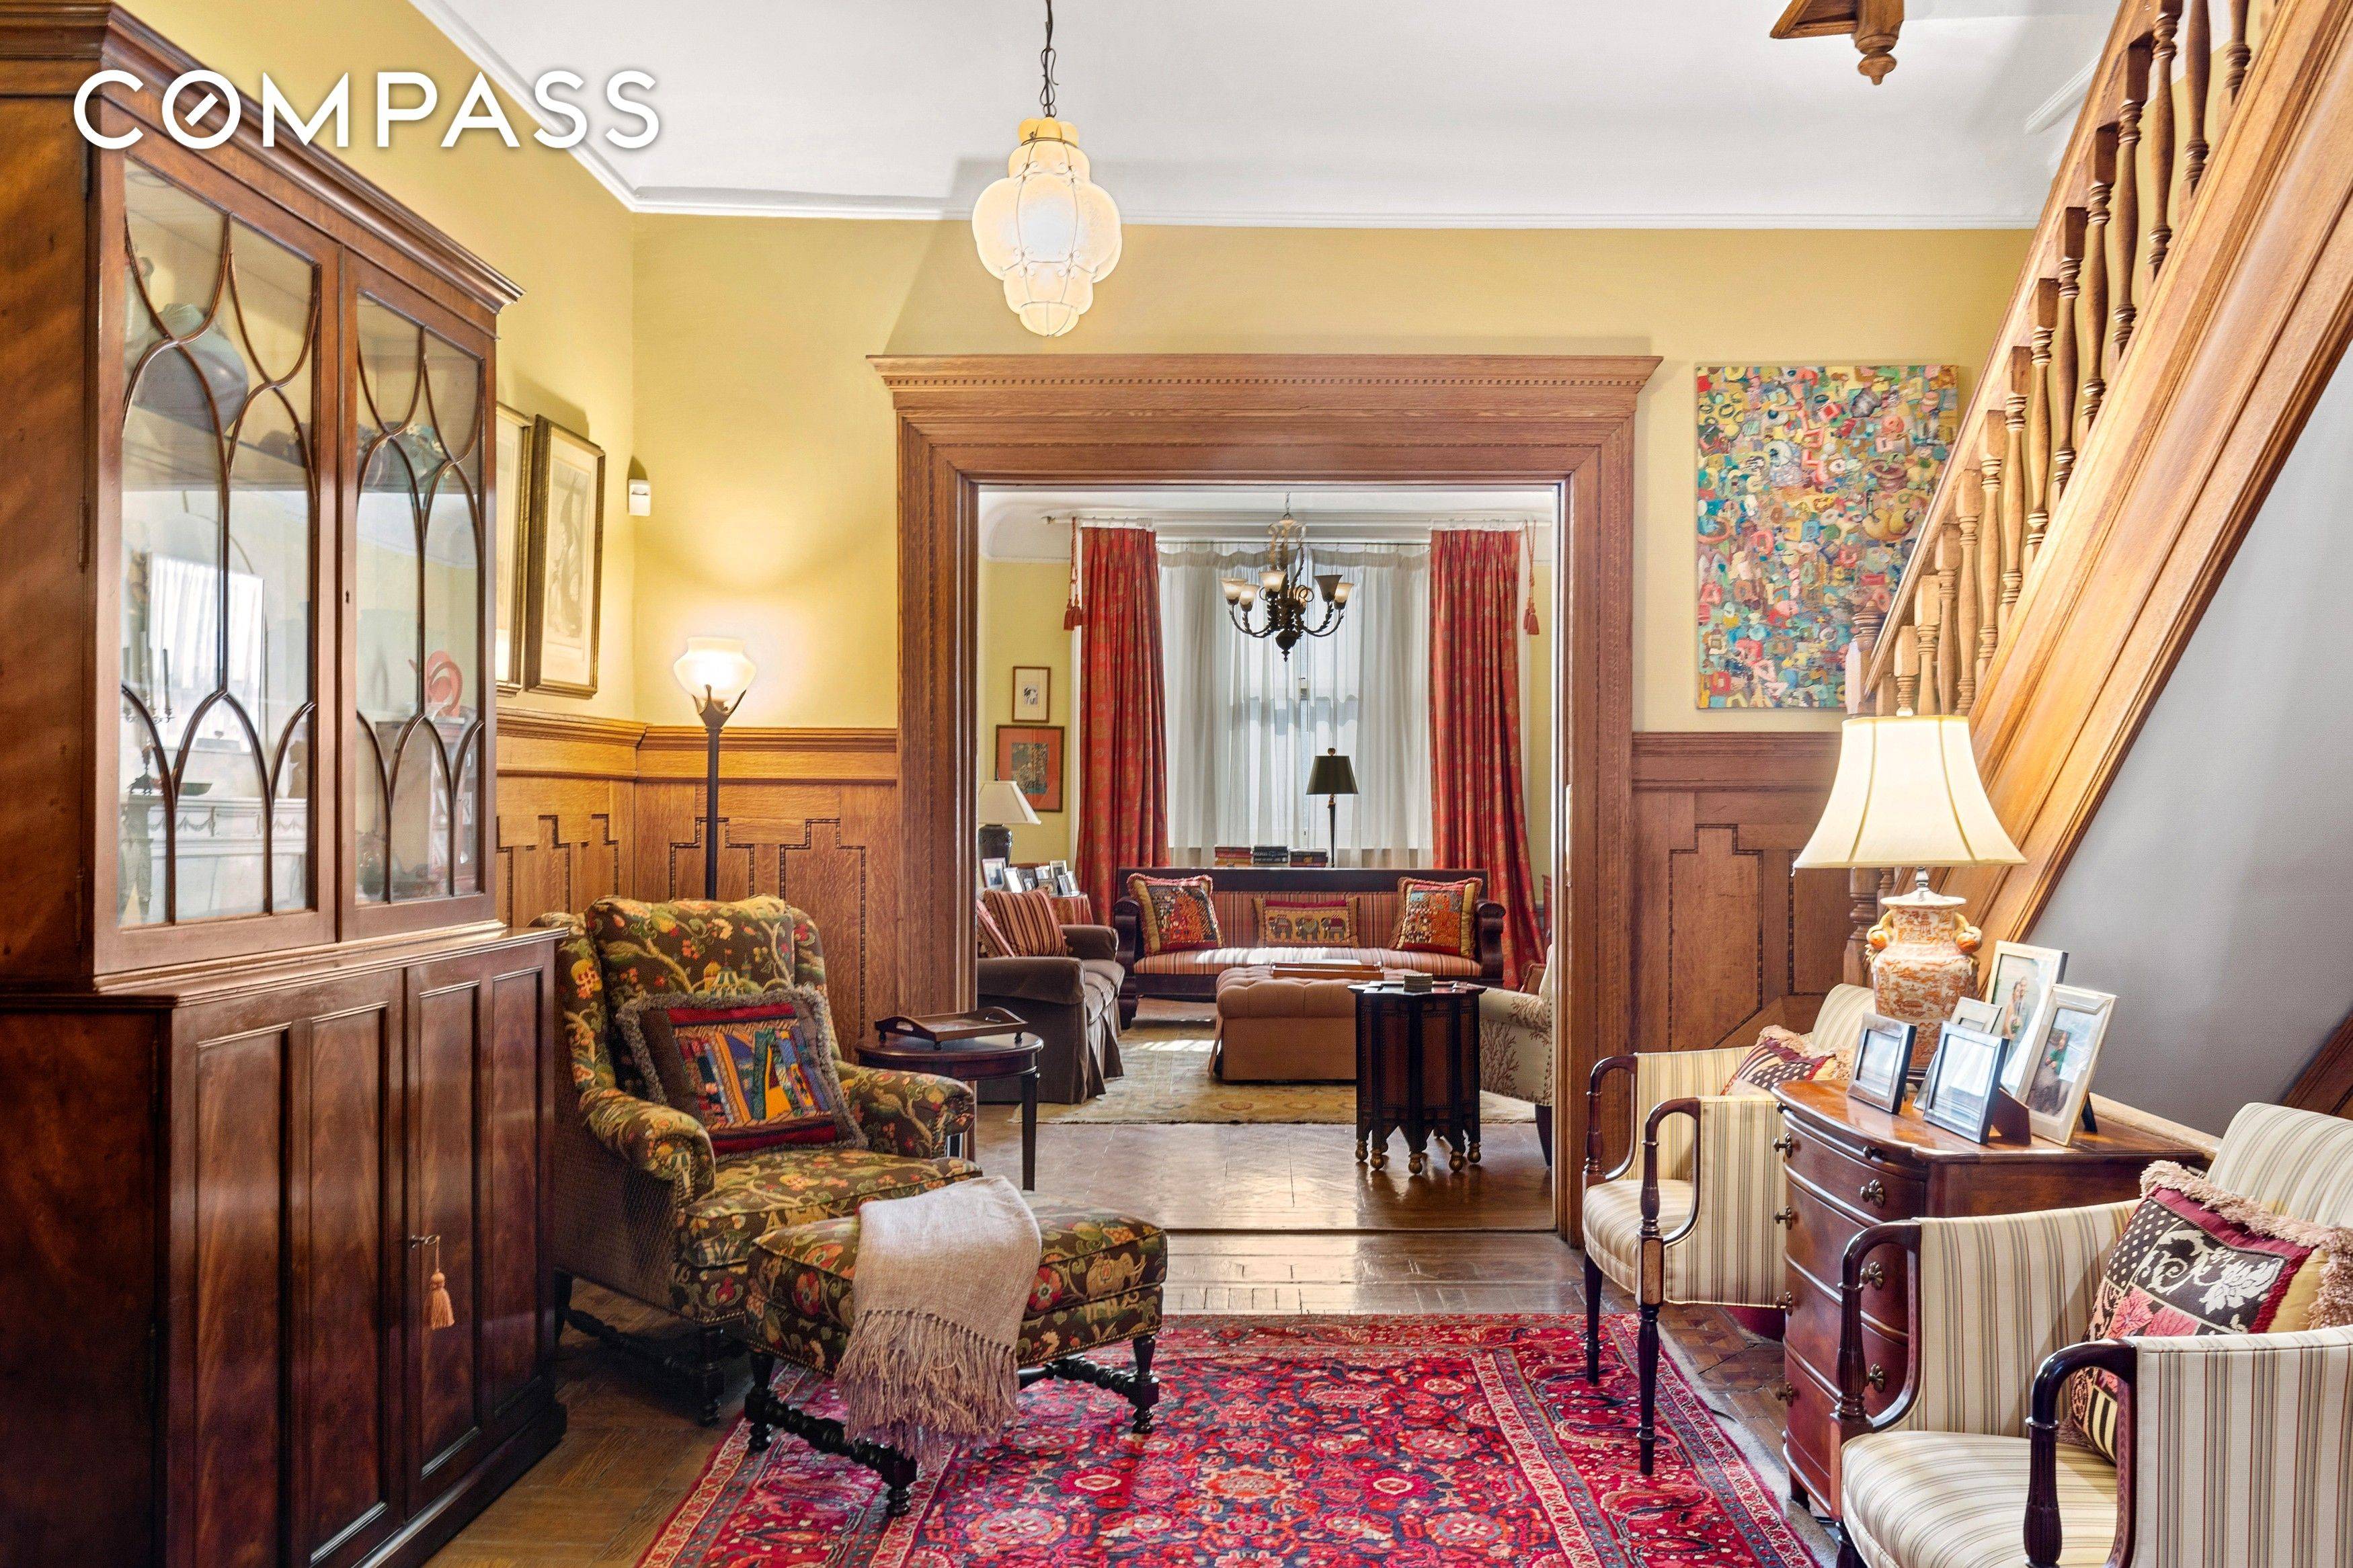 CAPTIVATING LATE 19TH CENTURY TOWNHOUSE Discretely located in the heart of the West 71st Street Historic District is this stunning Renaissance Revival style home built circa 1894, designed by Architects ...